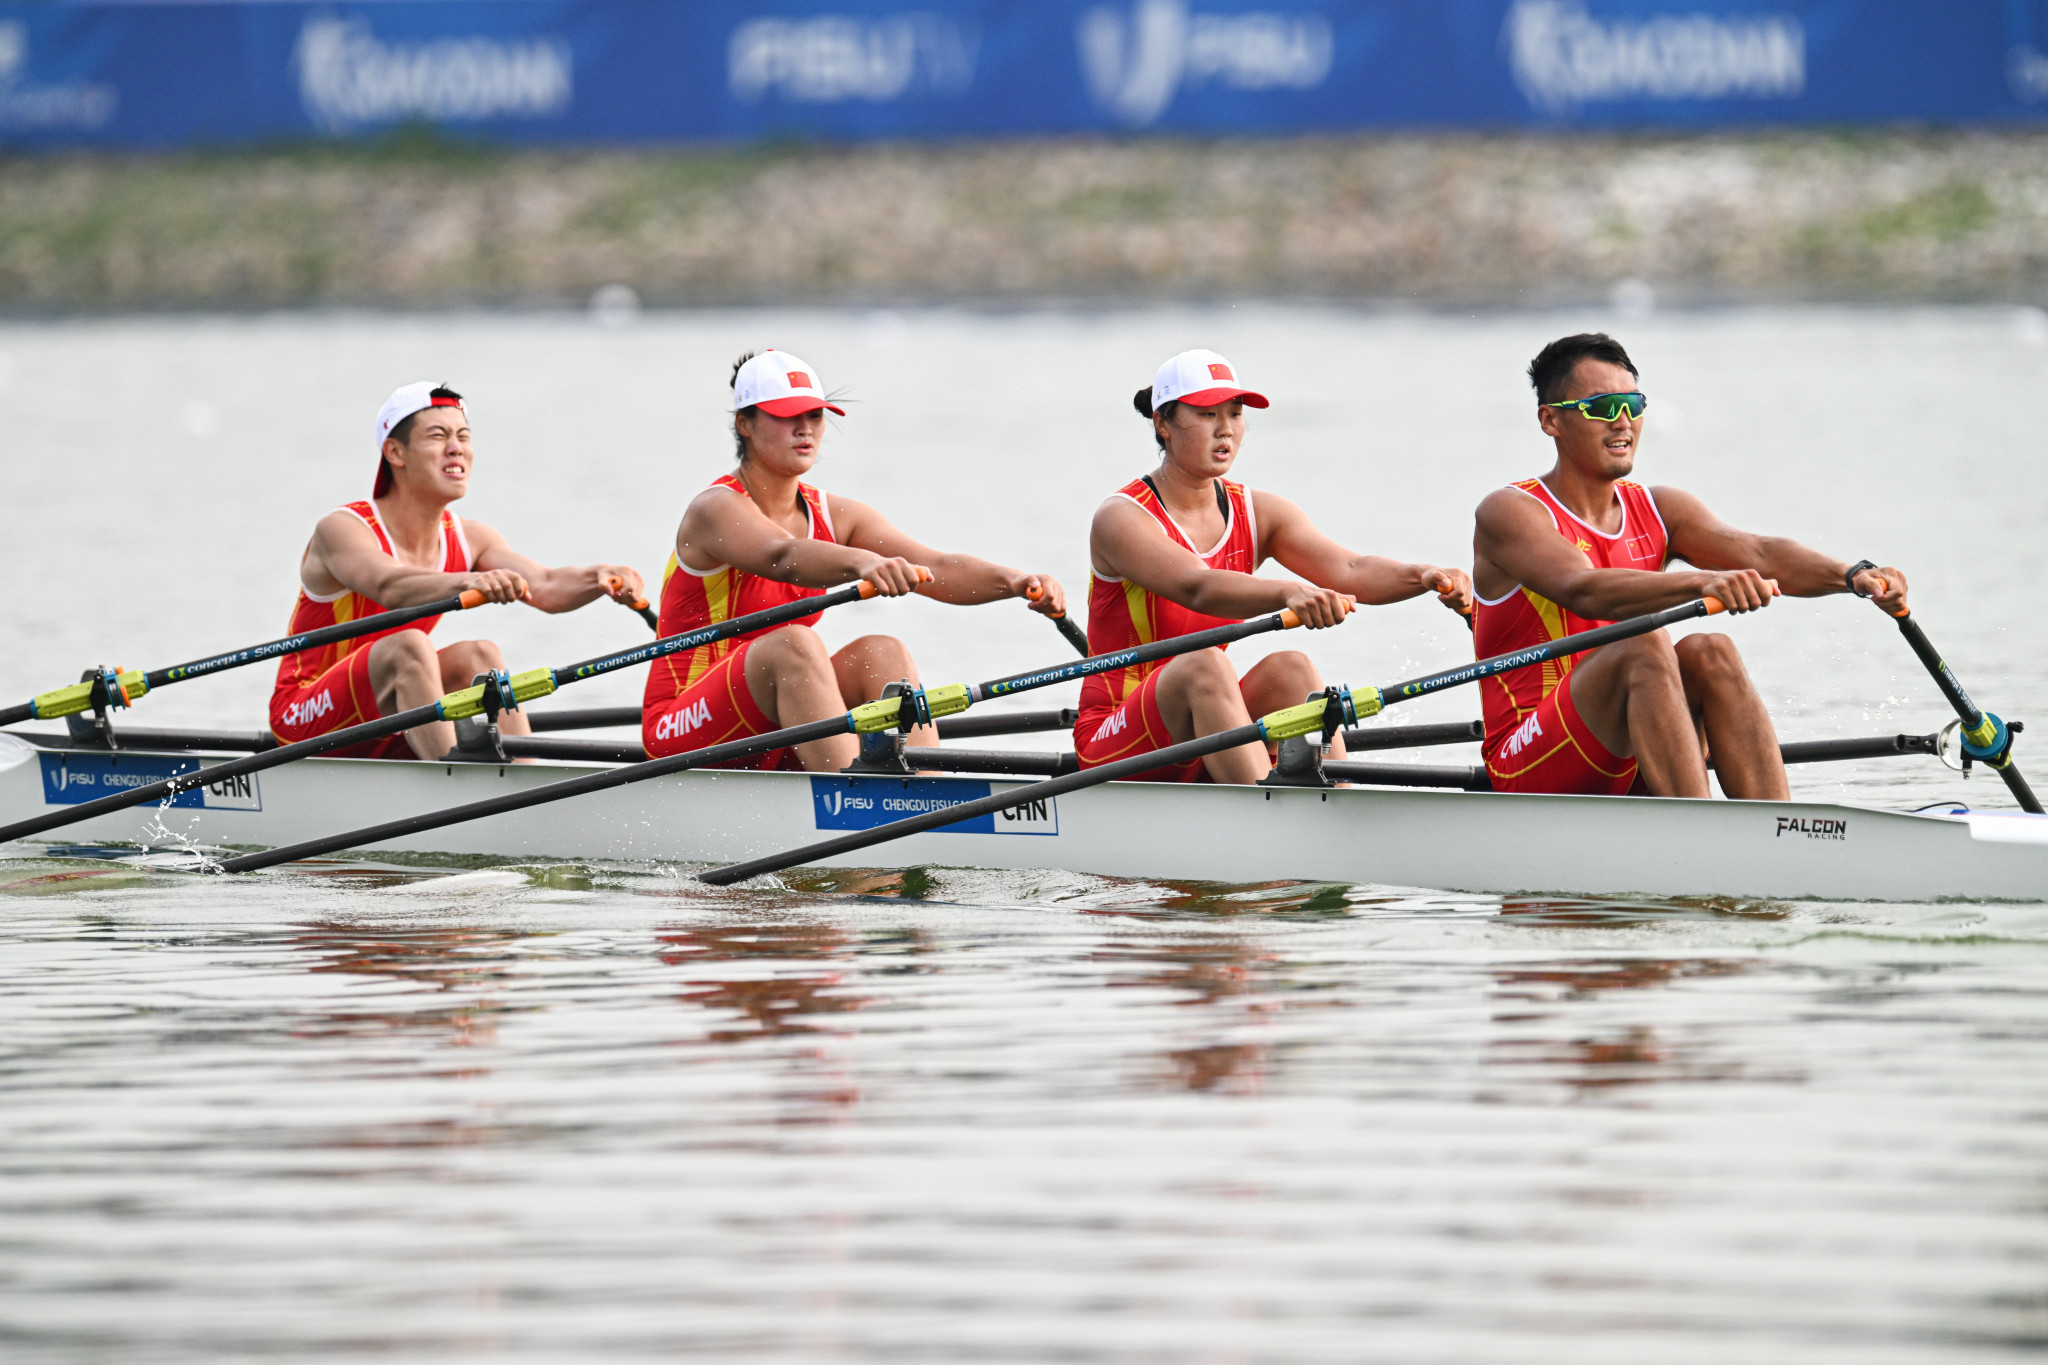 China’s rowing team in action during the mixed quadruple sculls final ©Chengdu 2021 